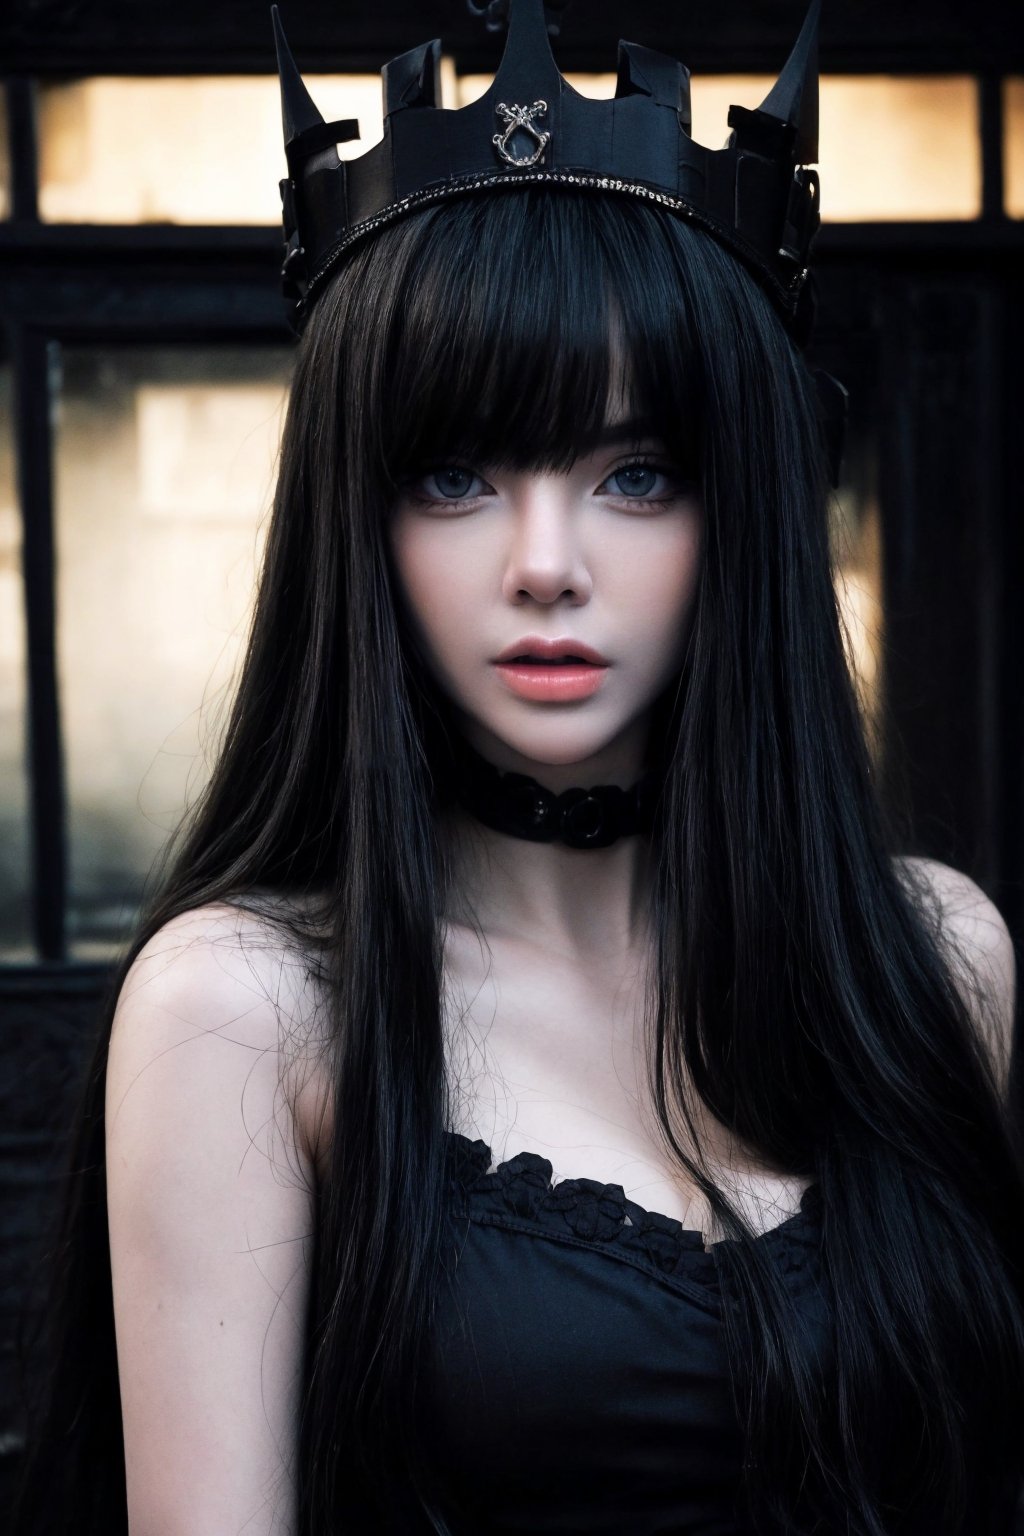 masterpiece, 8k, (real, photo real), best quality, high resolution, perfect details, 1girl, A beautiful goth girl, (Beautiful Hair:1.4), beautiful face, nice light gray eyes, perfect eyes, big breasts, small jewelry crown, (black gothic dress, dog choker), Temperament, elegance, low contrast, soft light, horror vibe, (black Indoor castle decoration:1.5), shot from head to waist, ,Hair over eyes,photo of perfecteyes eyes,DararatBoa